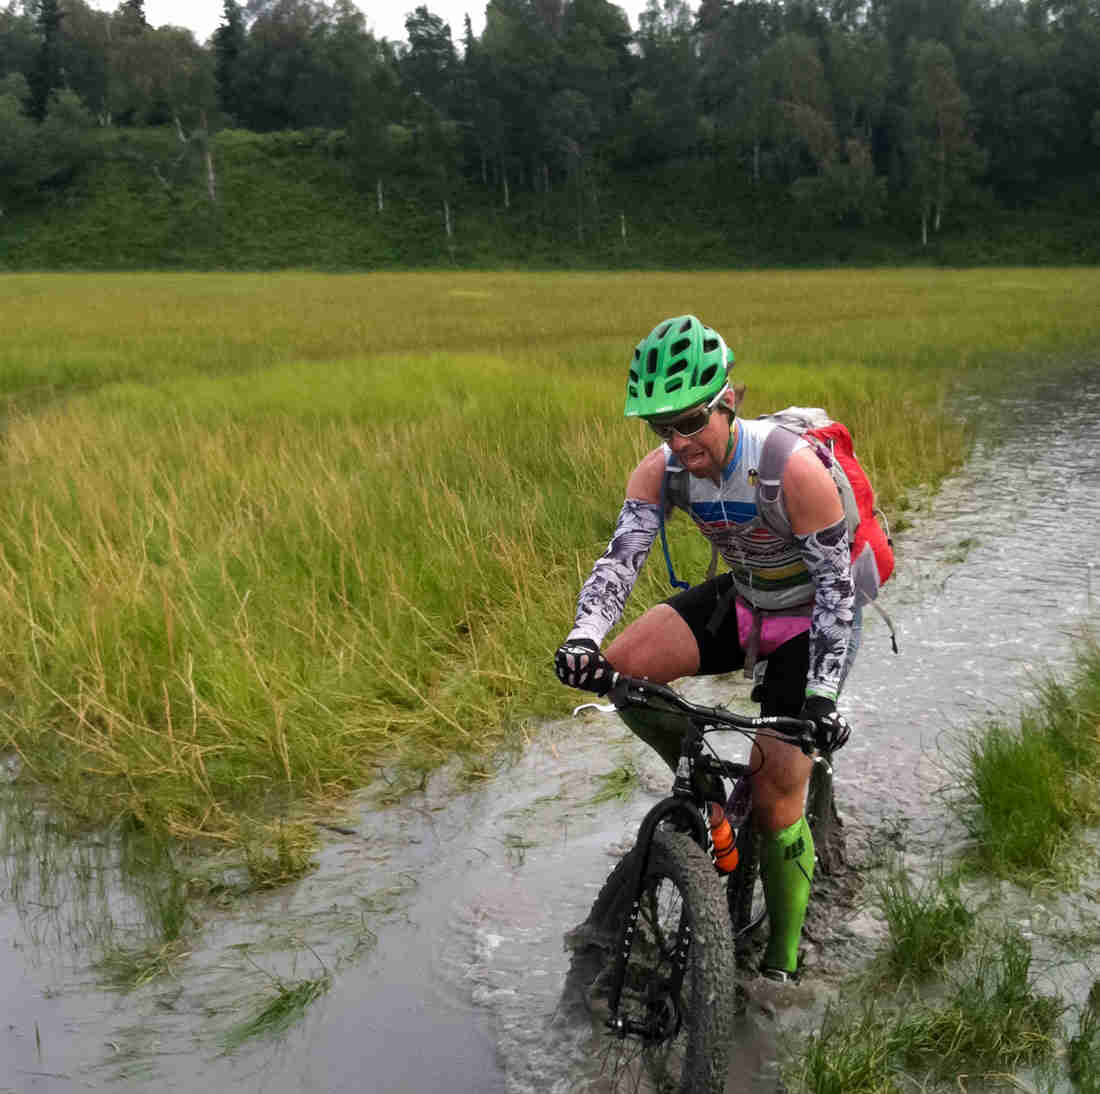 Front view of a cyclist, riding a black Surly fat bike through a waterway in a wetlands field, with trees in background